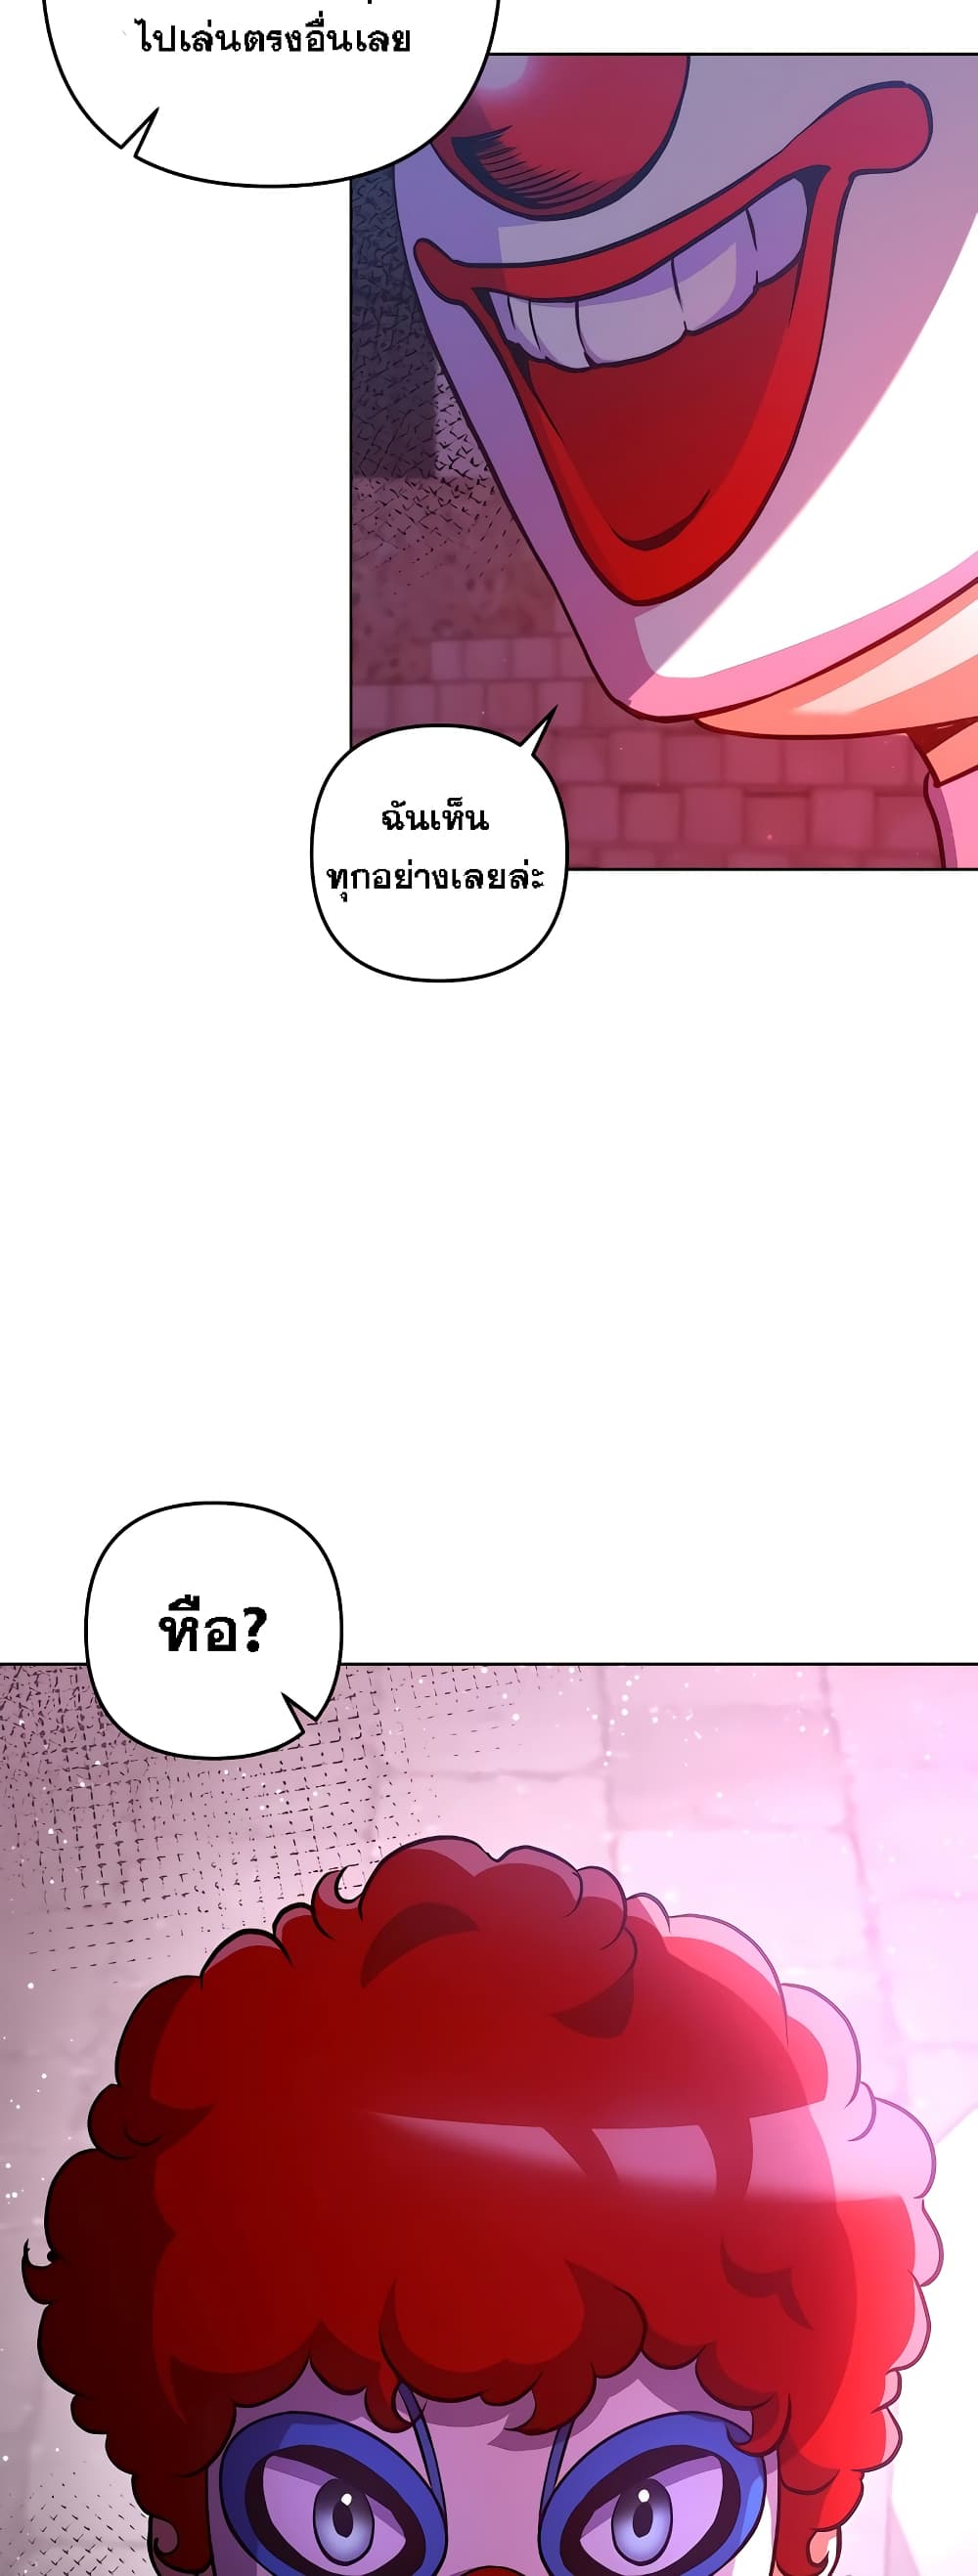 Surviving in an Action Manhwa 7-7